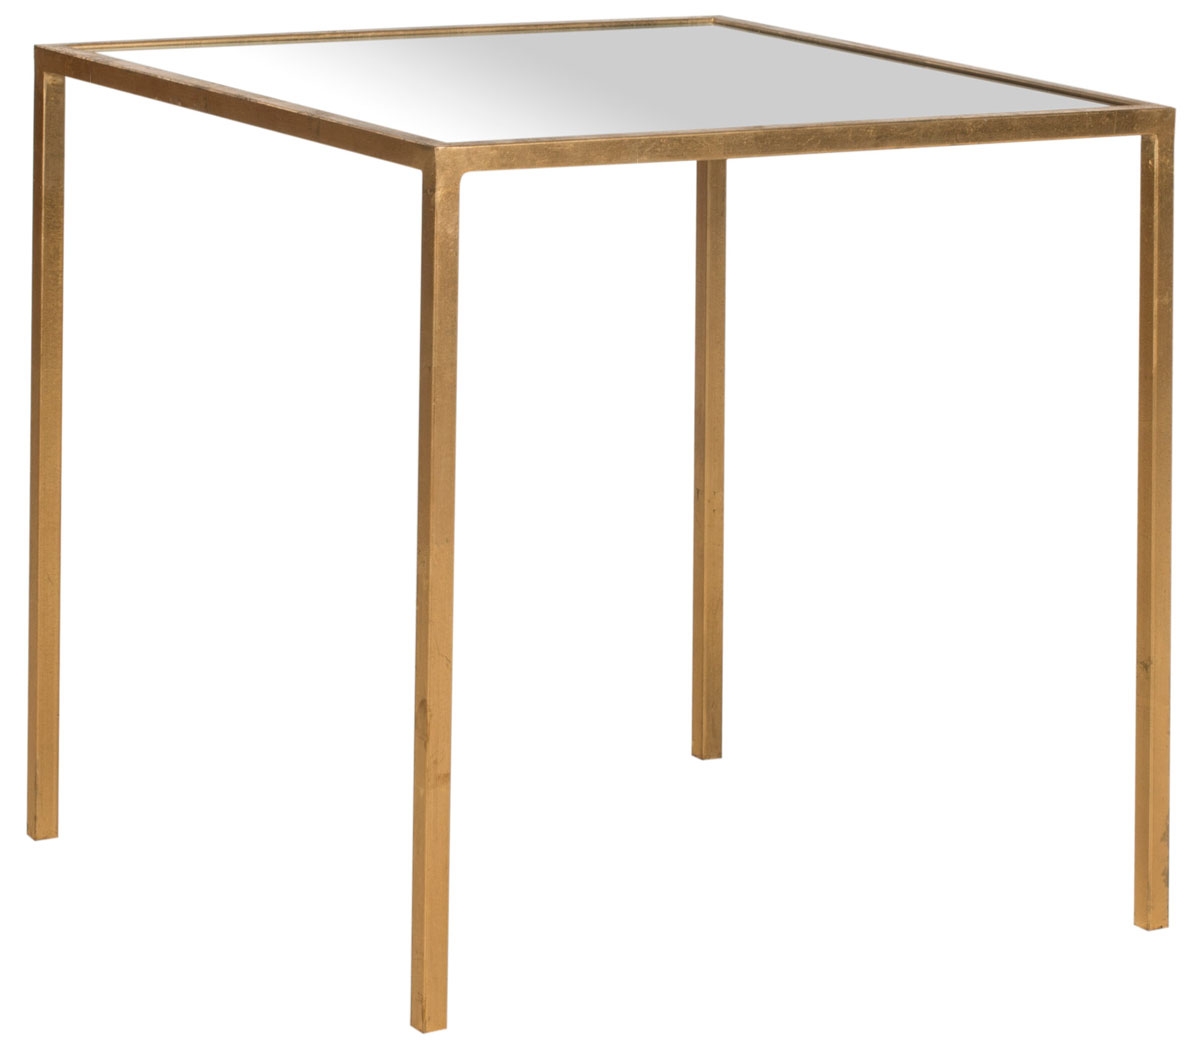 Kiley Mirror Top Accent Table - Gold - Arlo Home - Image 1